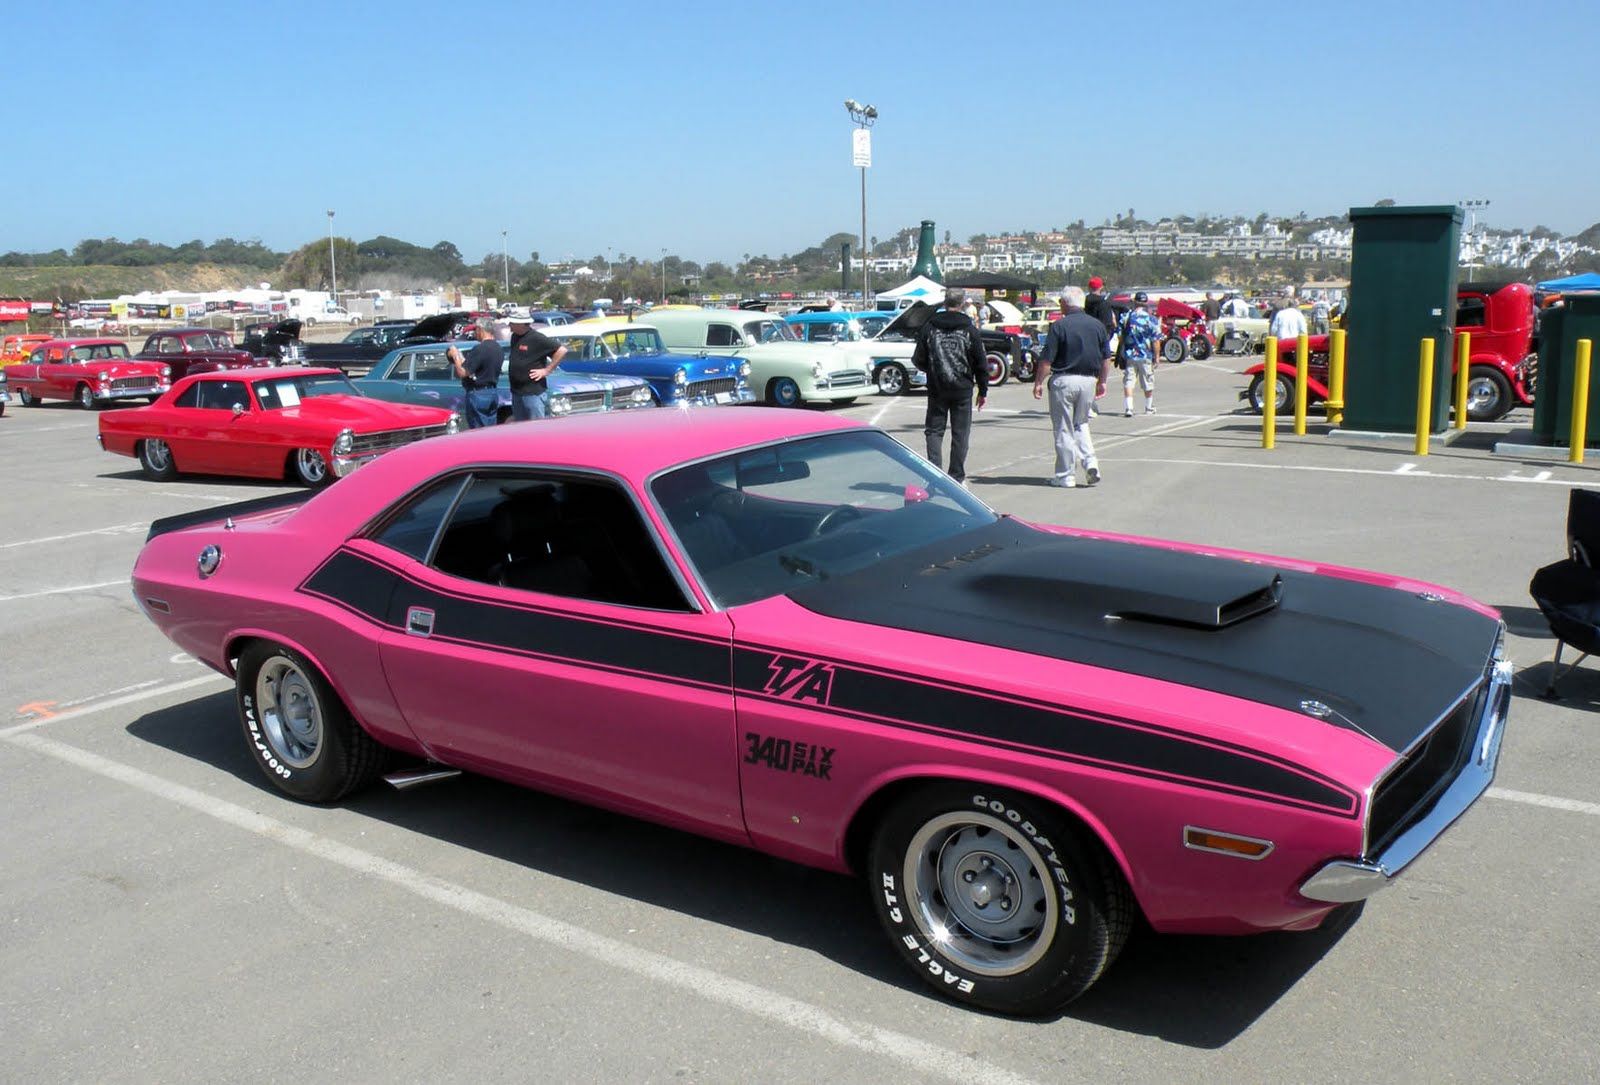 Muscle Cars: 1970 Dodge Challenger by Priscilla